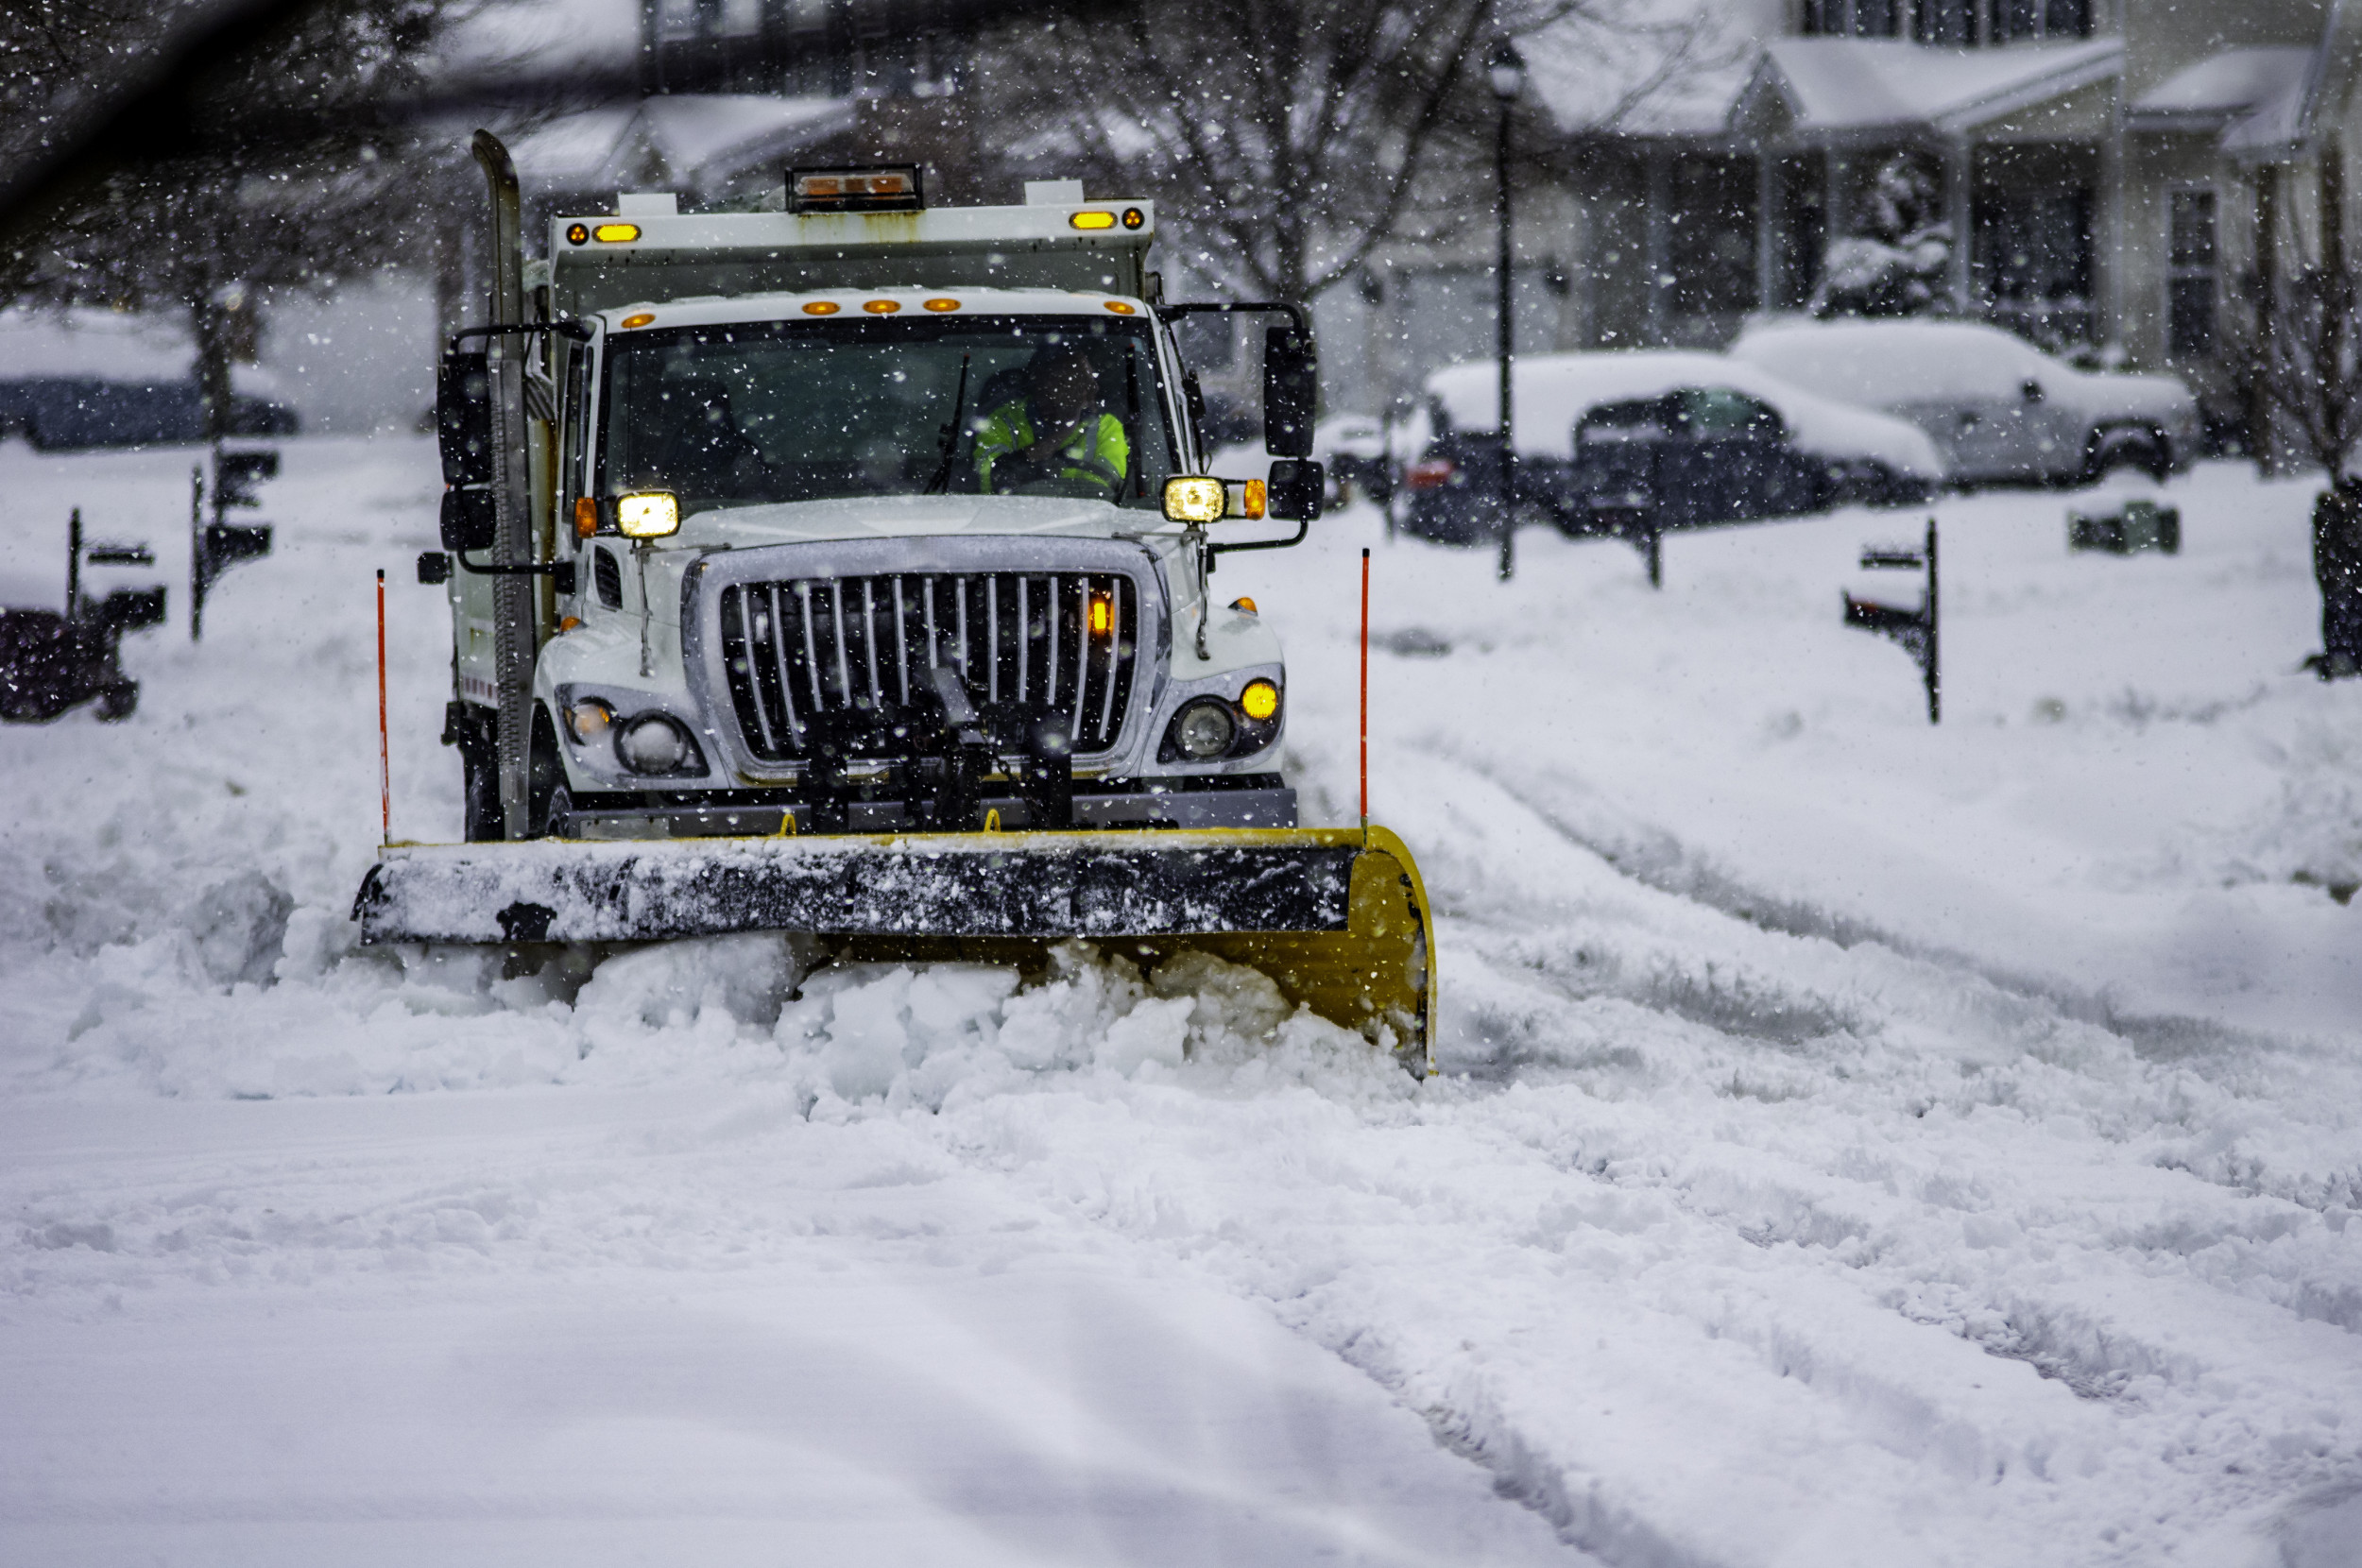 Winter weather alerts have been issued for 15 states with warnings across the United States